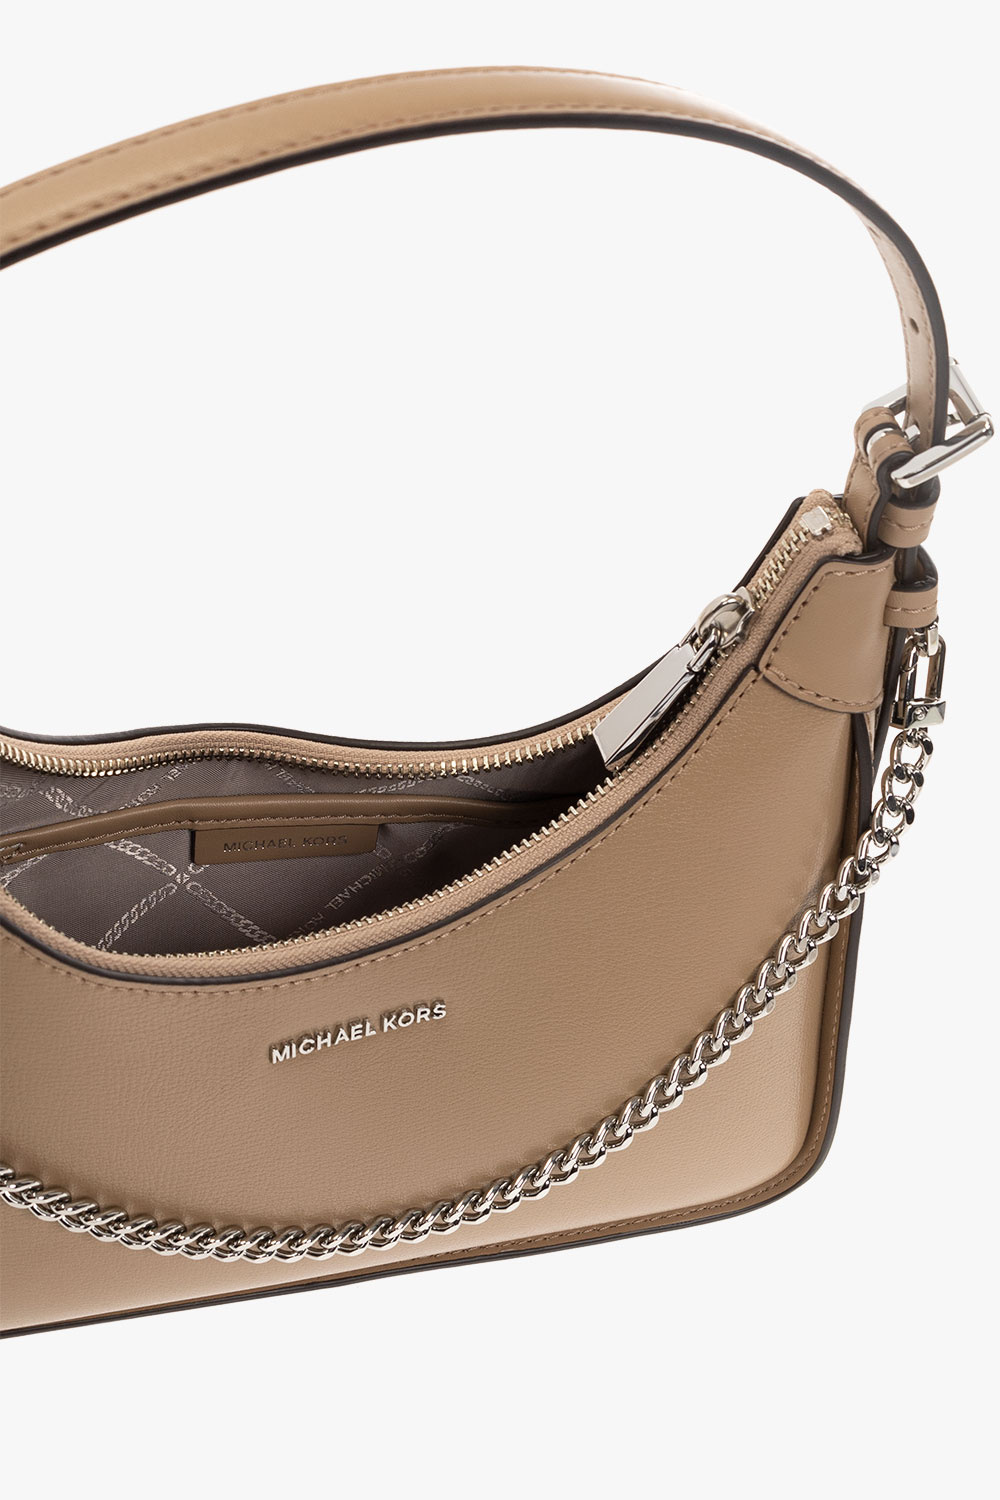 Michael Kors Wilma Leather Small Pouchette Bag Size: Os, Col: Soft Pin